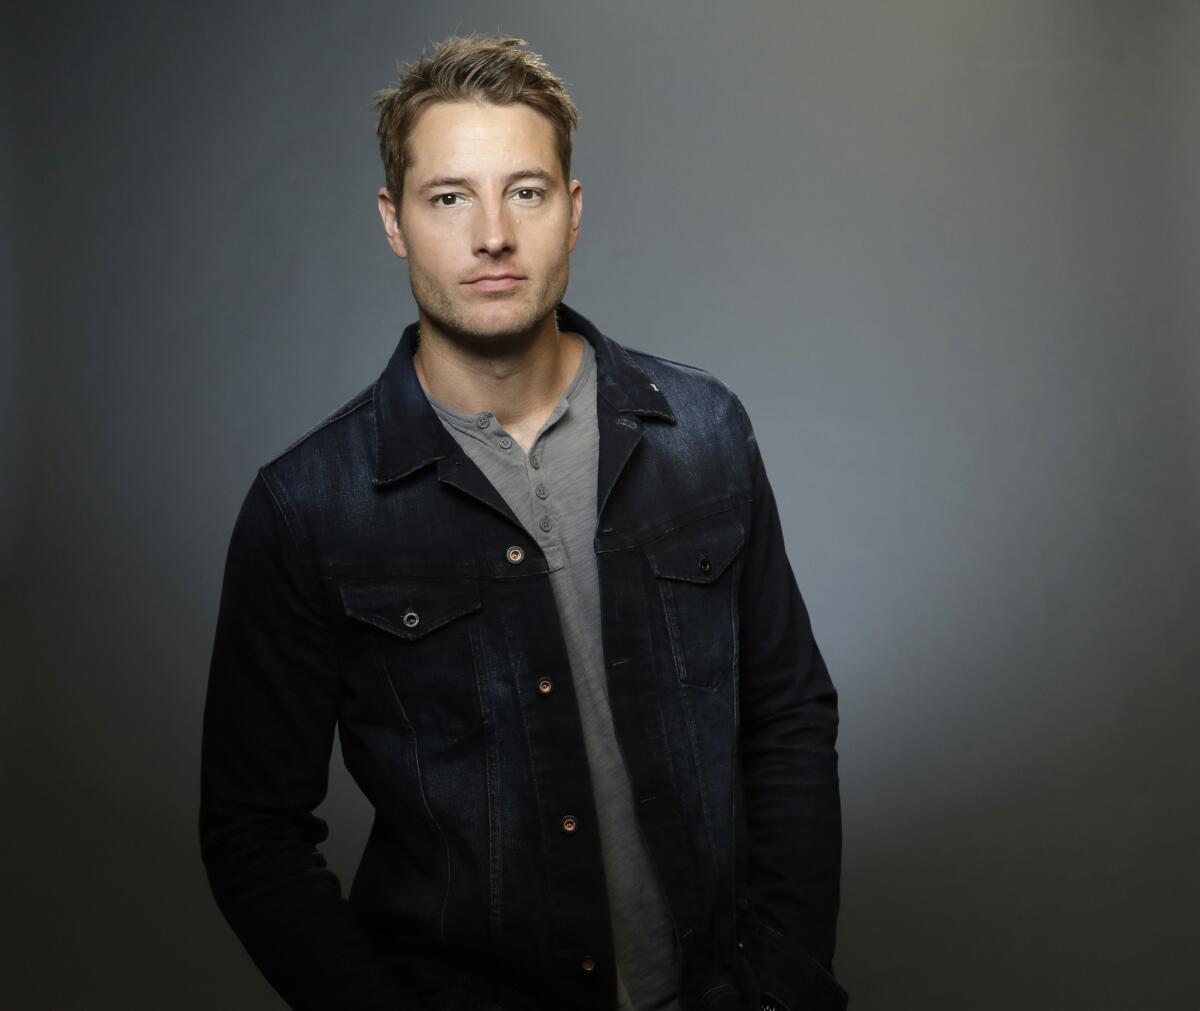 Actor Justin Hartley of "This Is Us" has leased out his Valley Glen home after buying a new place in Encino.